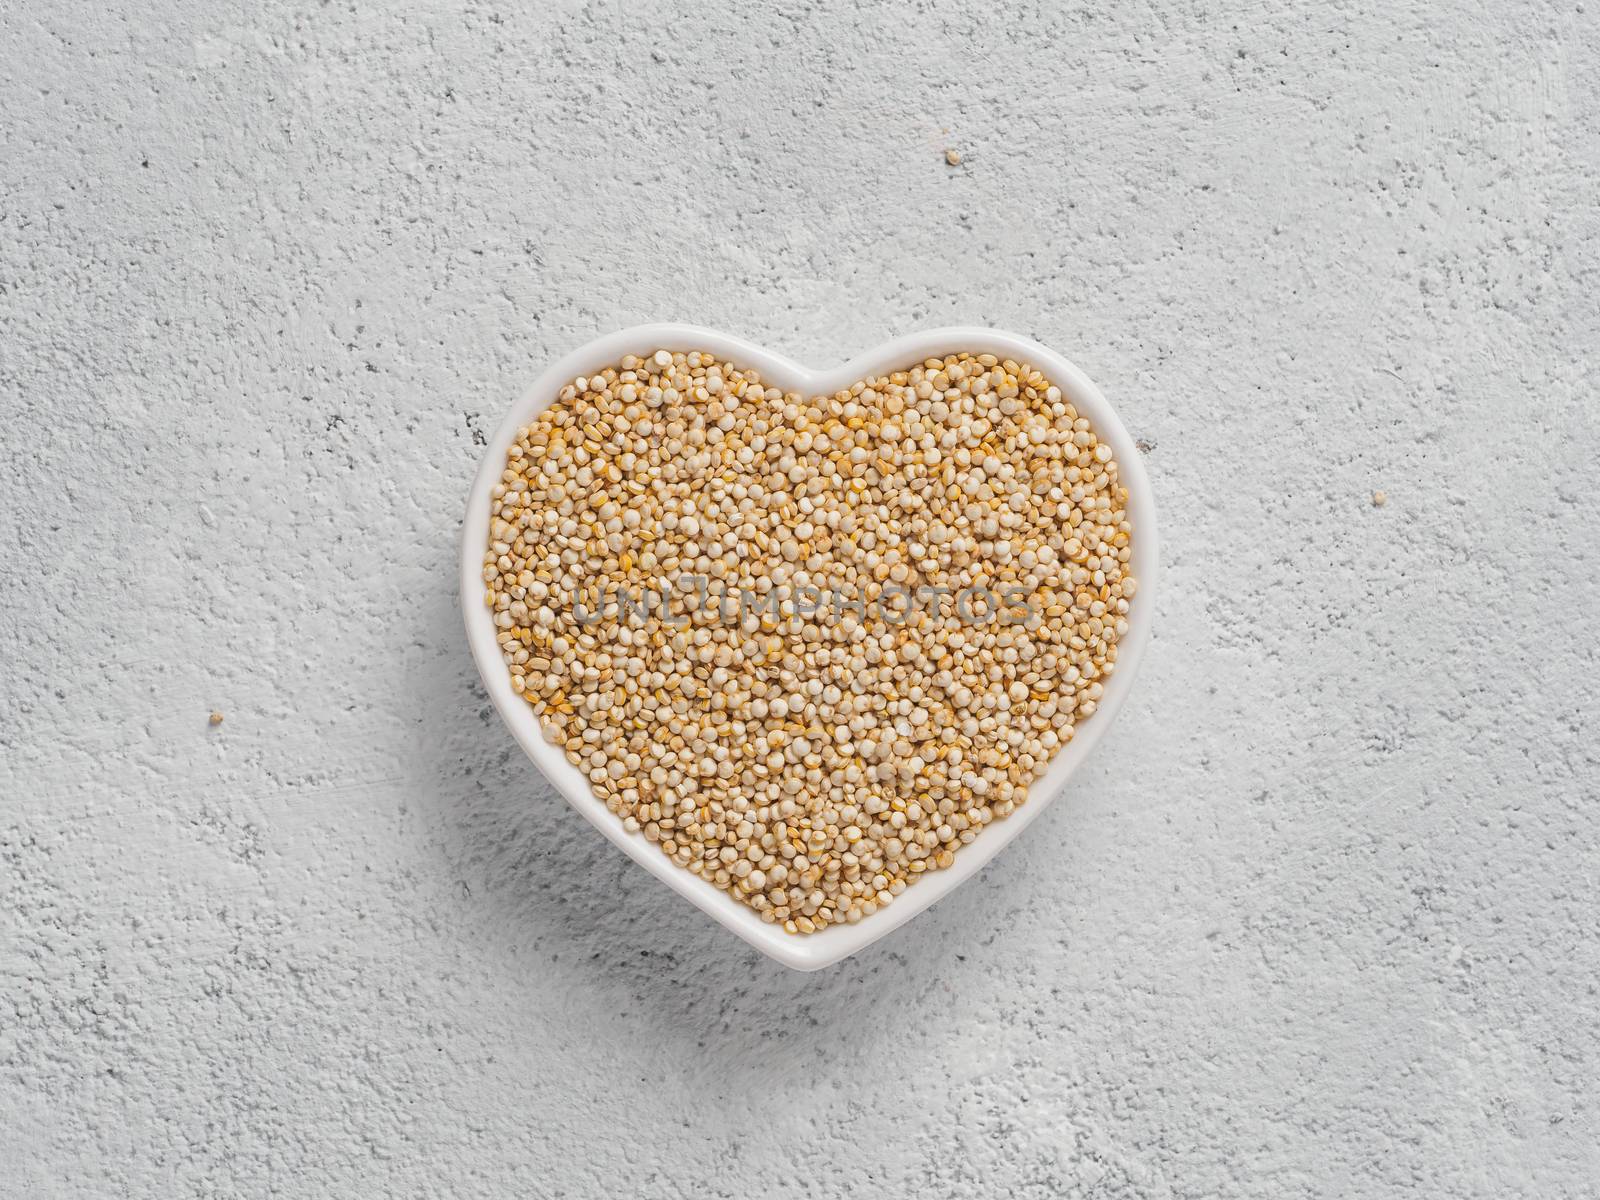 Quinoa in heart-shaped bowl on gray cement background. Gluten free ancient grain for healthy diet. I love quinoa concept. Copy space.